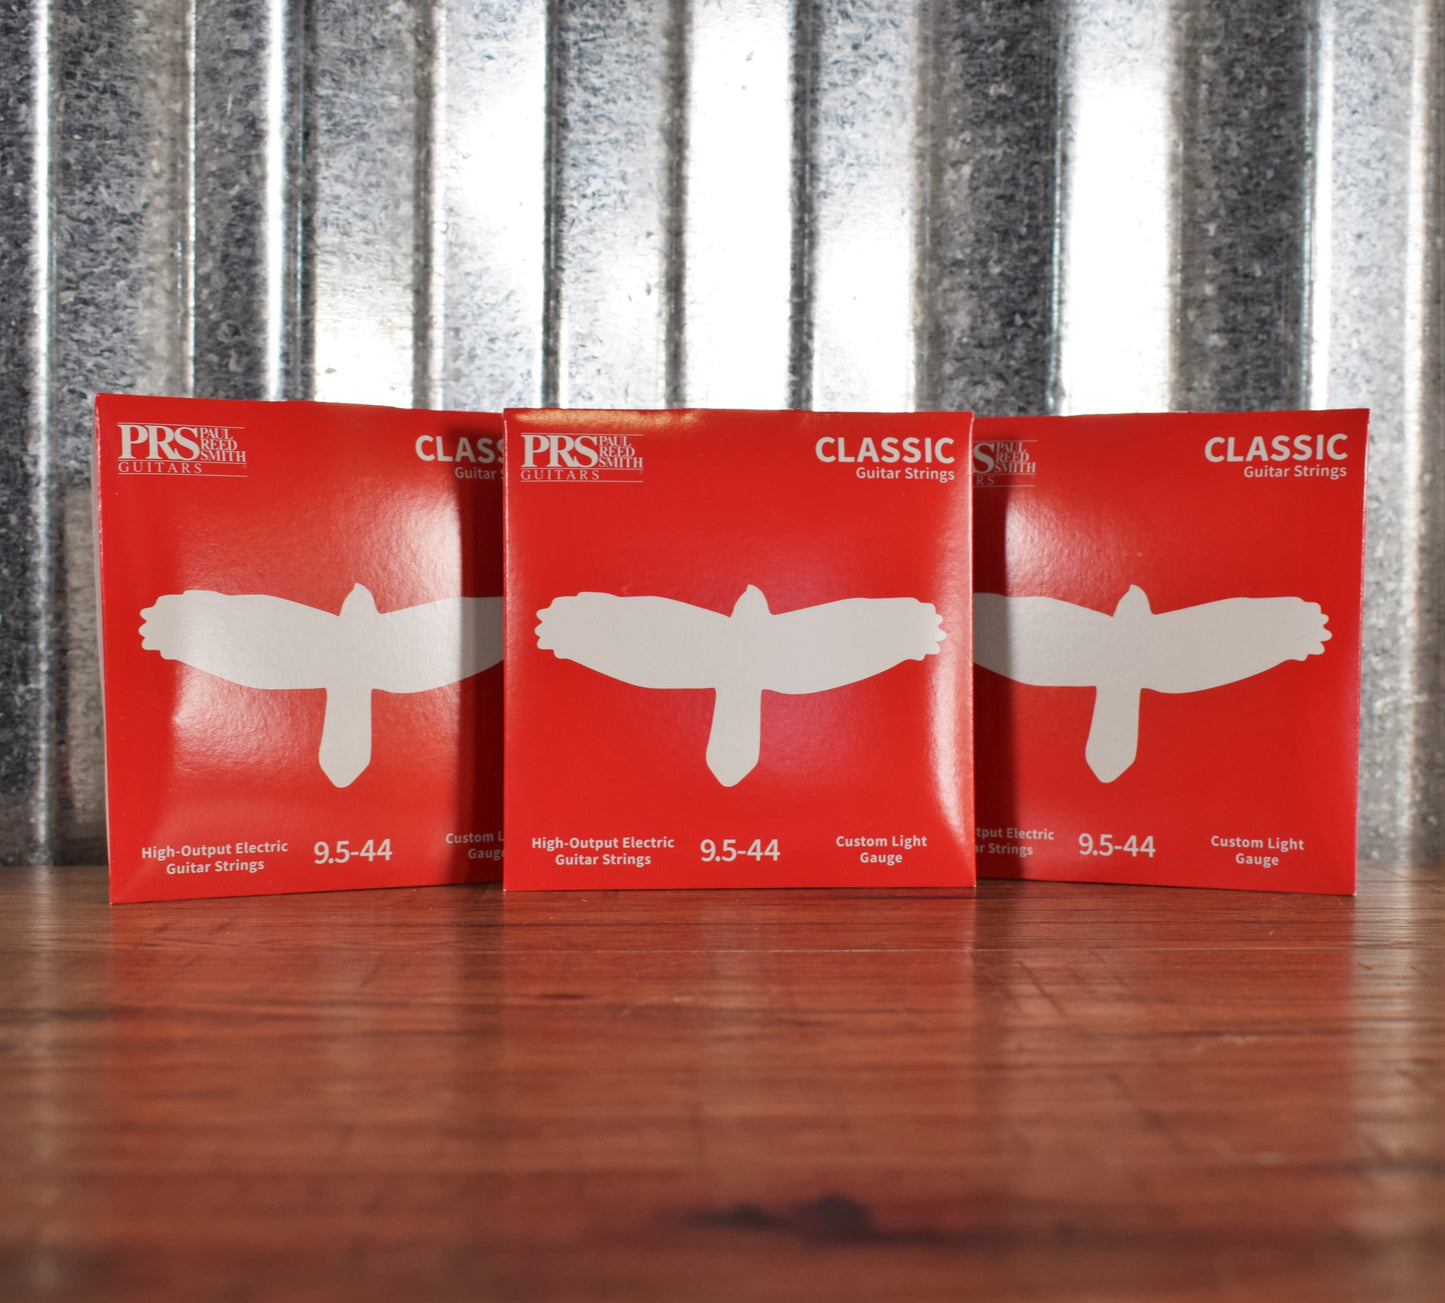 PRS Paul Reed Smith Classic Custom Light Electric Guitar Strings 9.5-44 Gauge 3 Pack